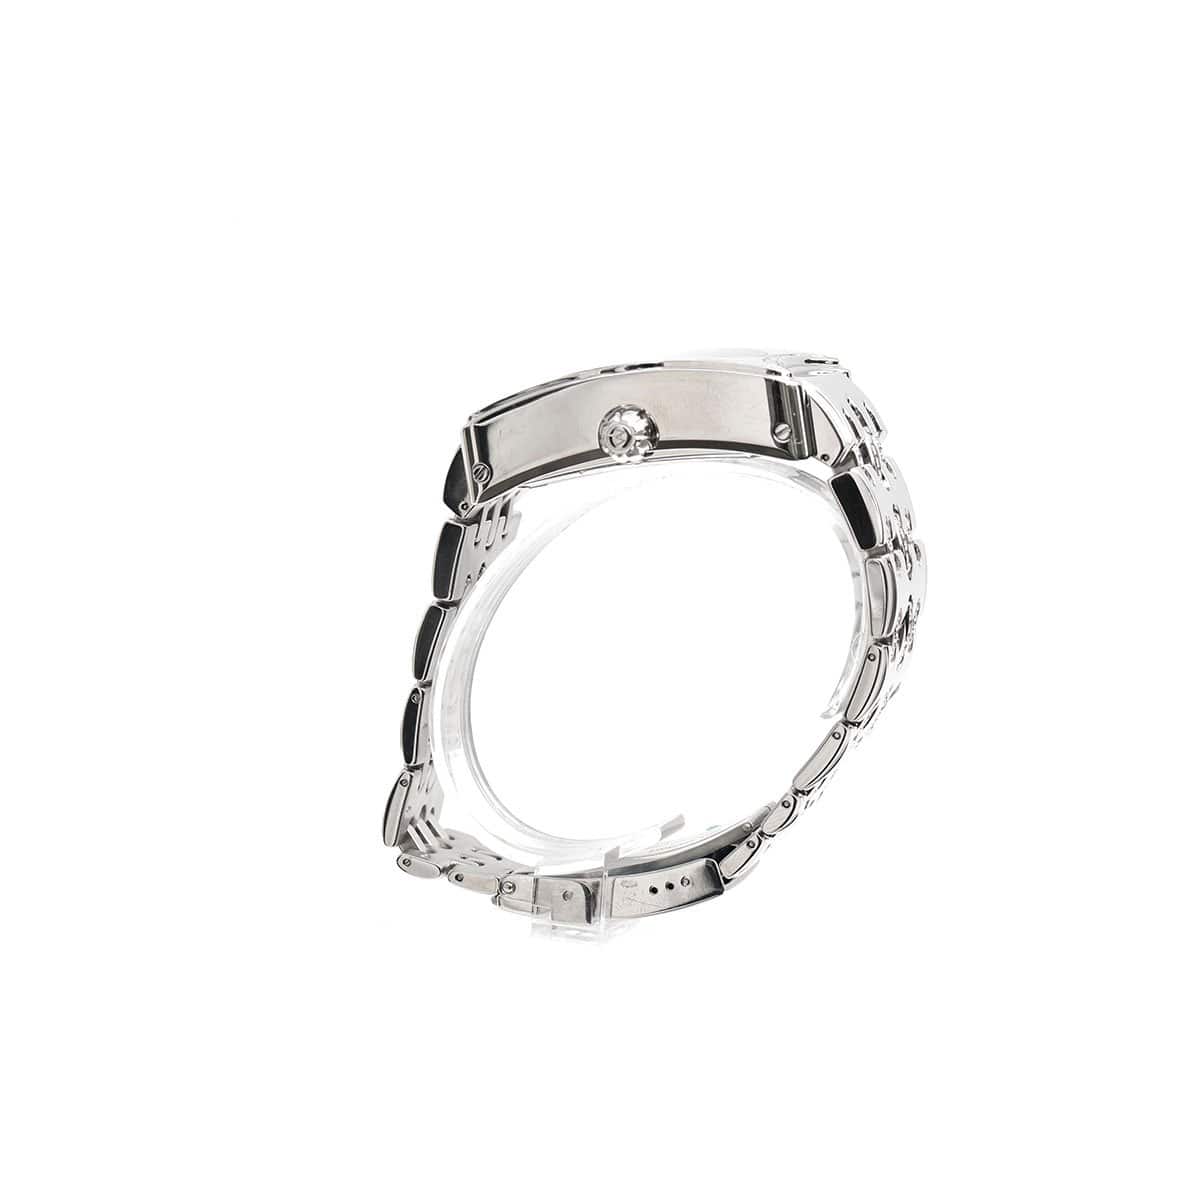 CHRIS AIRE WATCH- INNER CIRCLE - Chris Aire Fine Jewelry & Timepieces